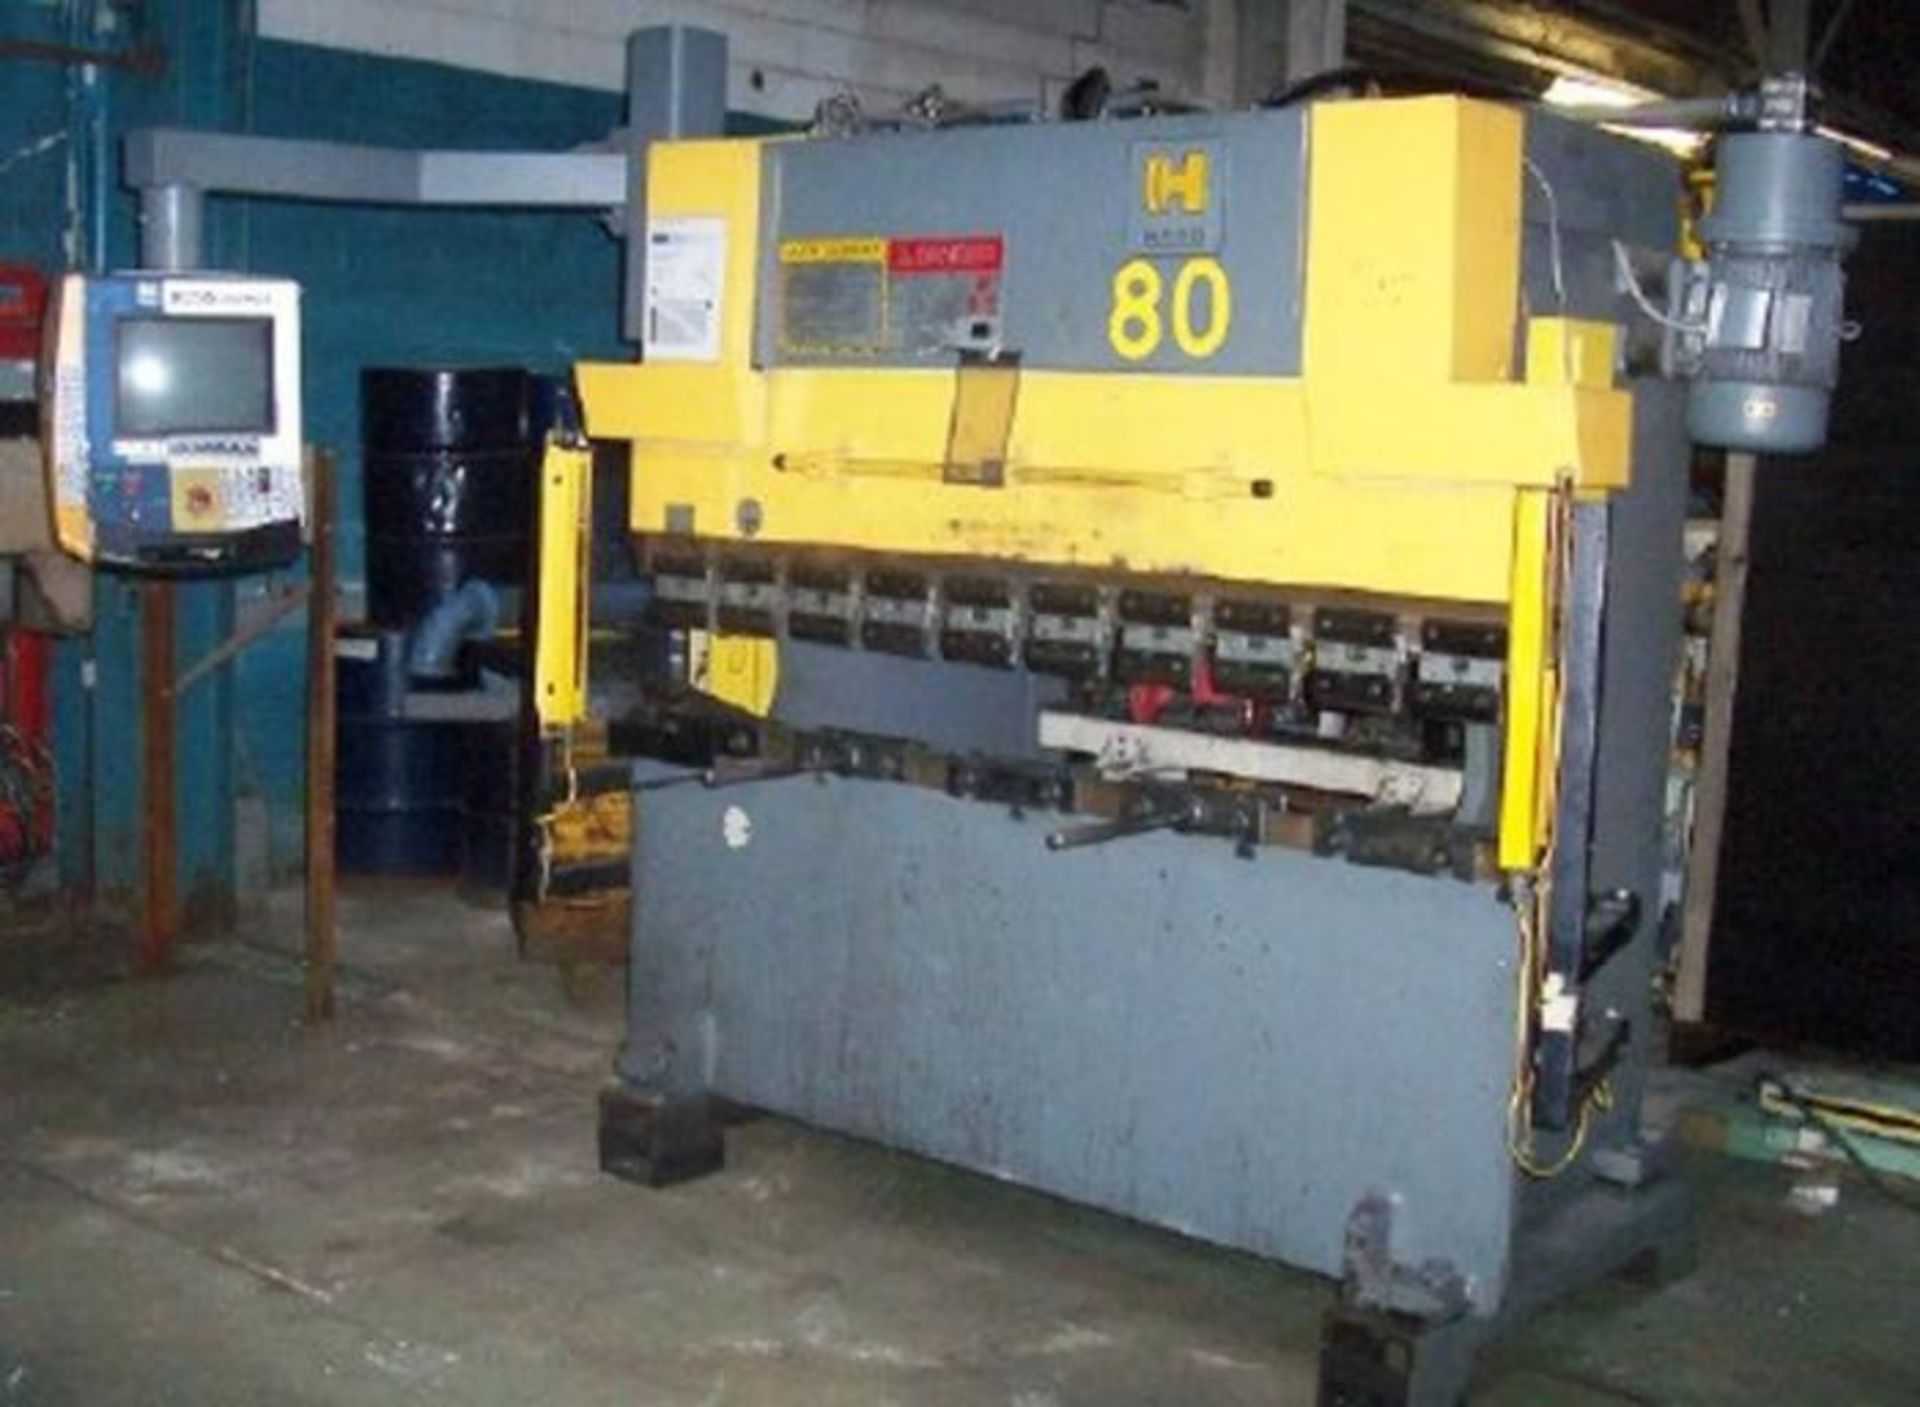 REGISTER TODAY. LARGEST AUCTION SALE OF THE YEAR OF FABRICATION & METALWORKING MACHINERY - Image 2 of 5